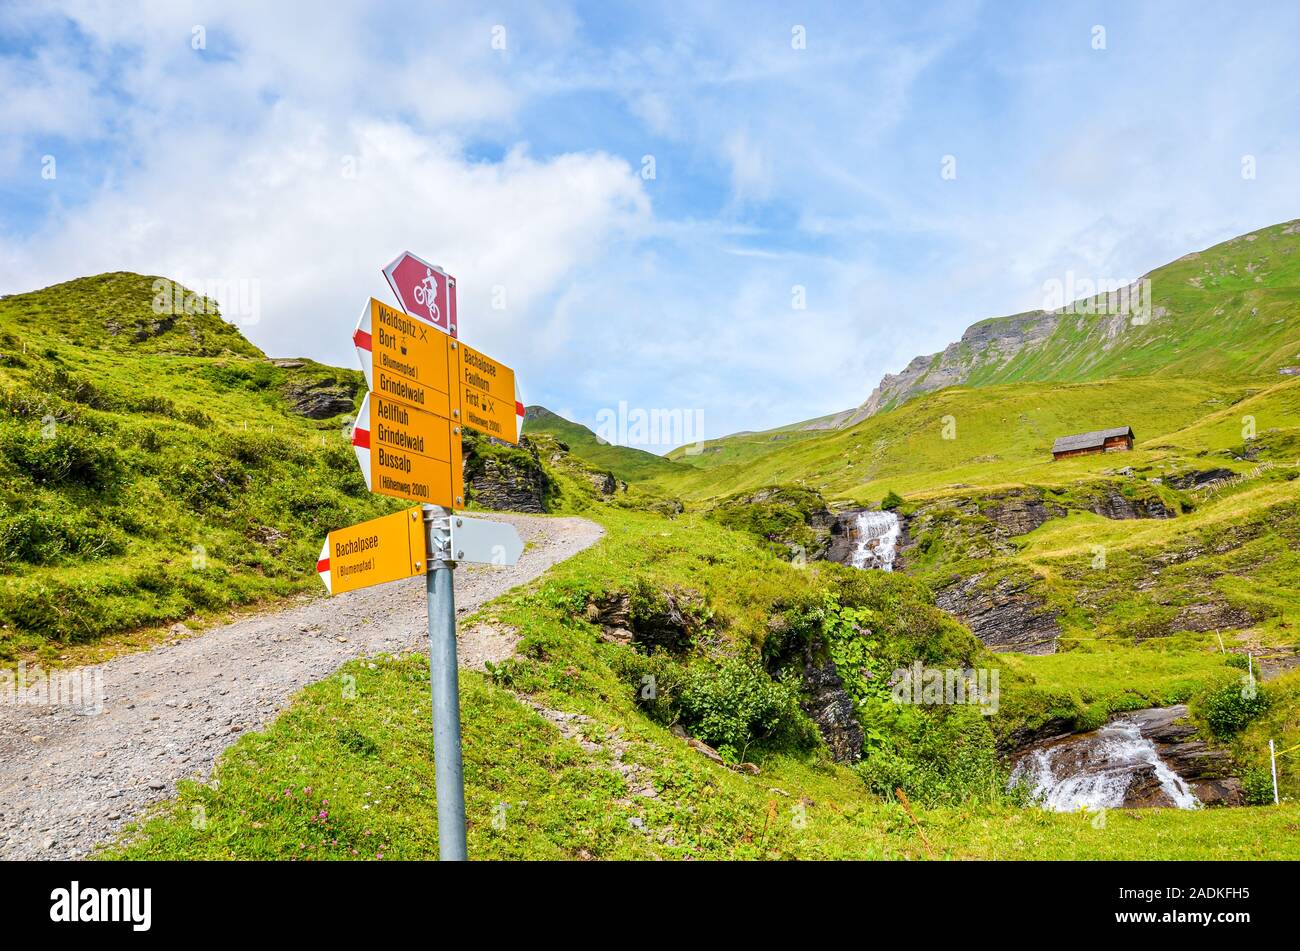 Yellow tourist sign on the path from Grindelwald leading to Bachalpsee lake in Switzerland. Information sign giving distances and directions to hikers in the Swiss Alps. Summer Alpine landscape. Stock Photo